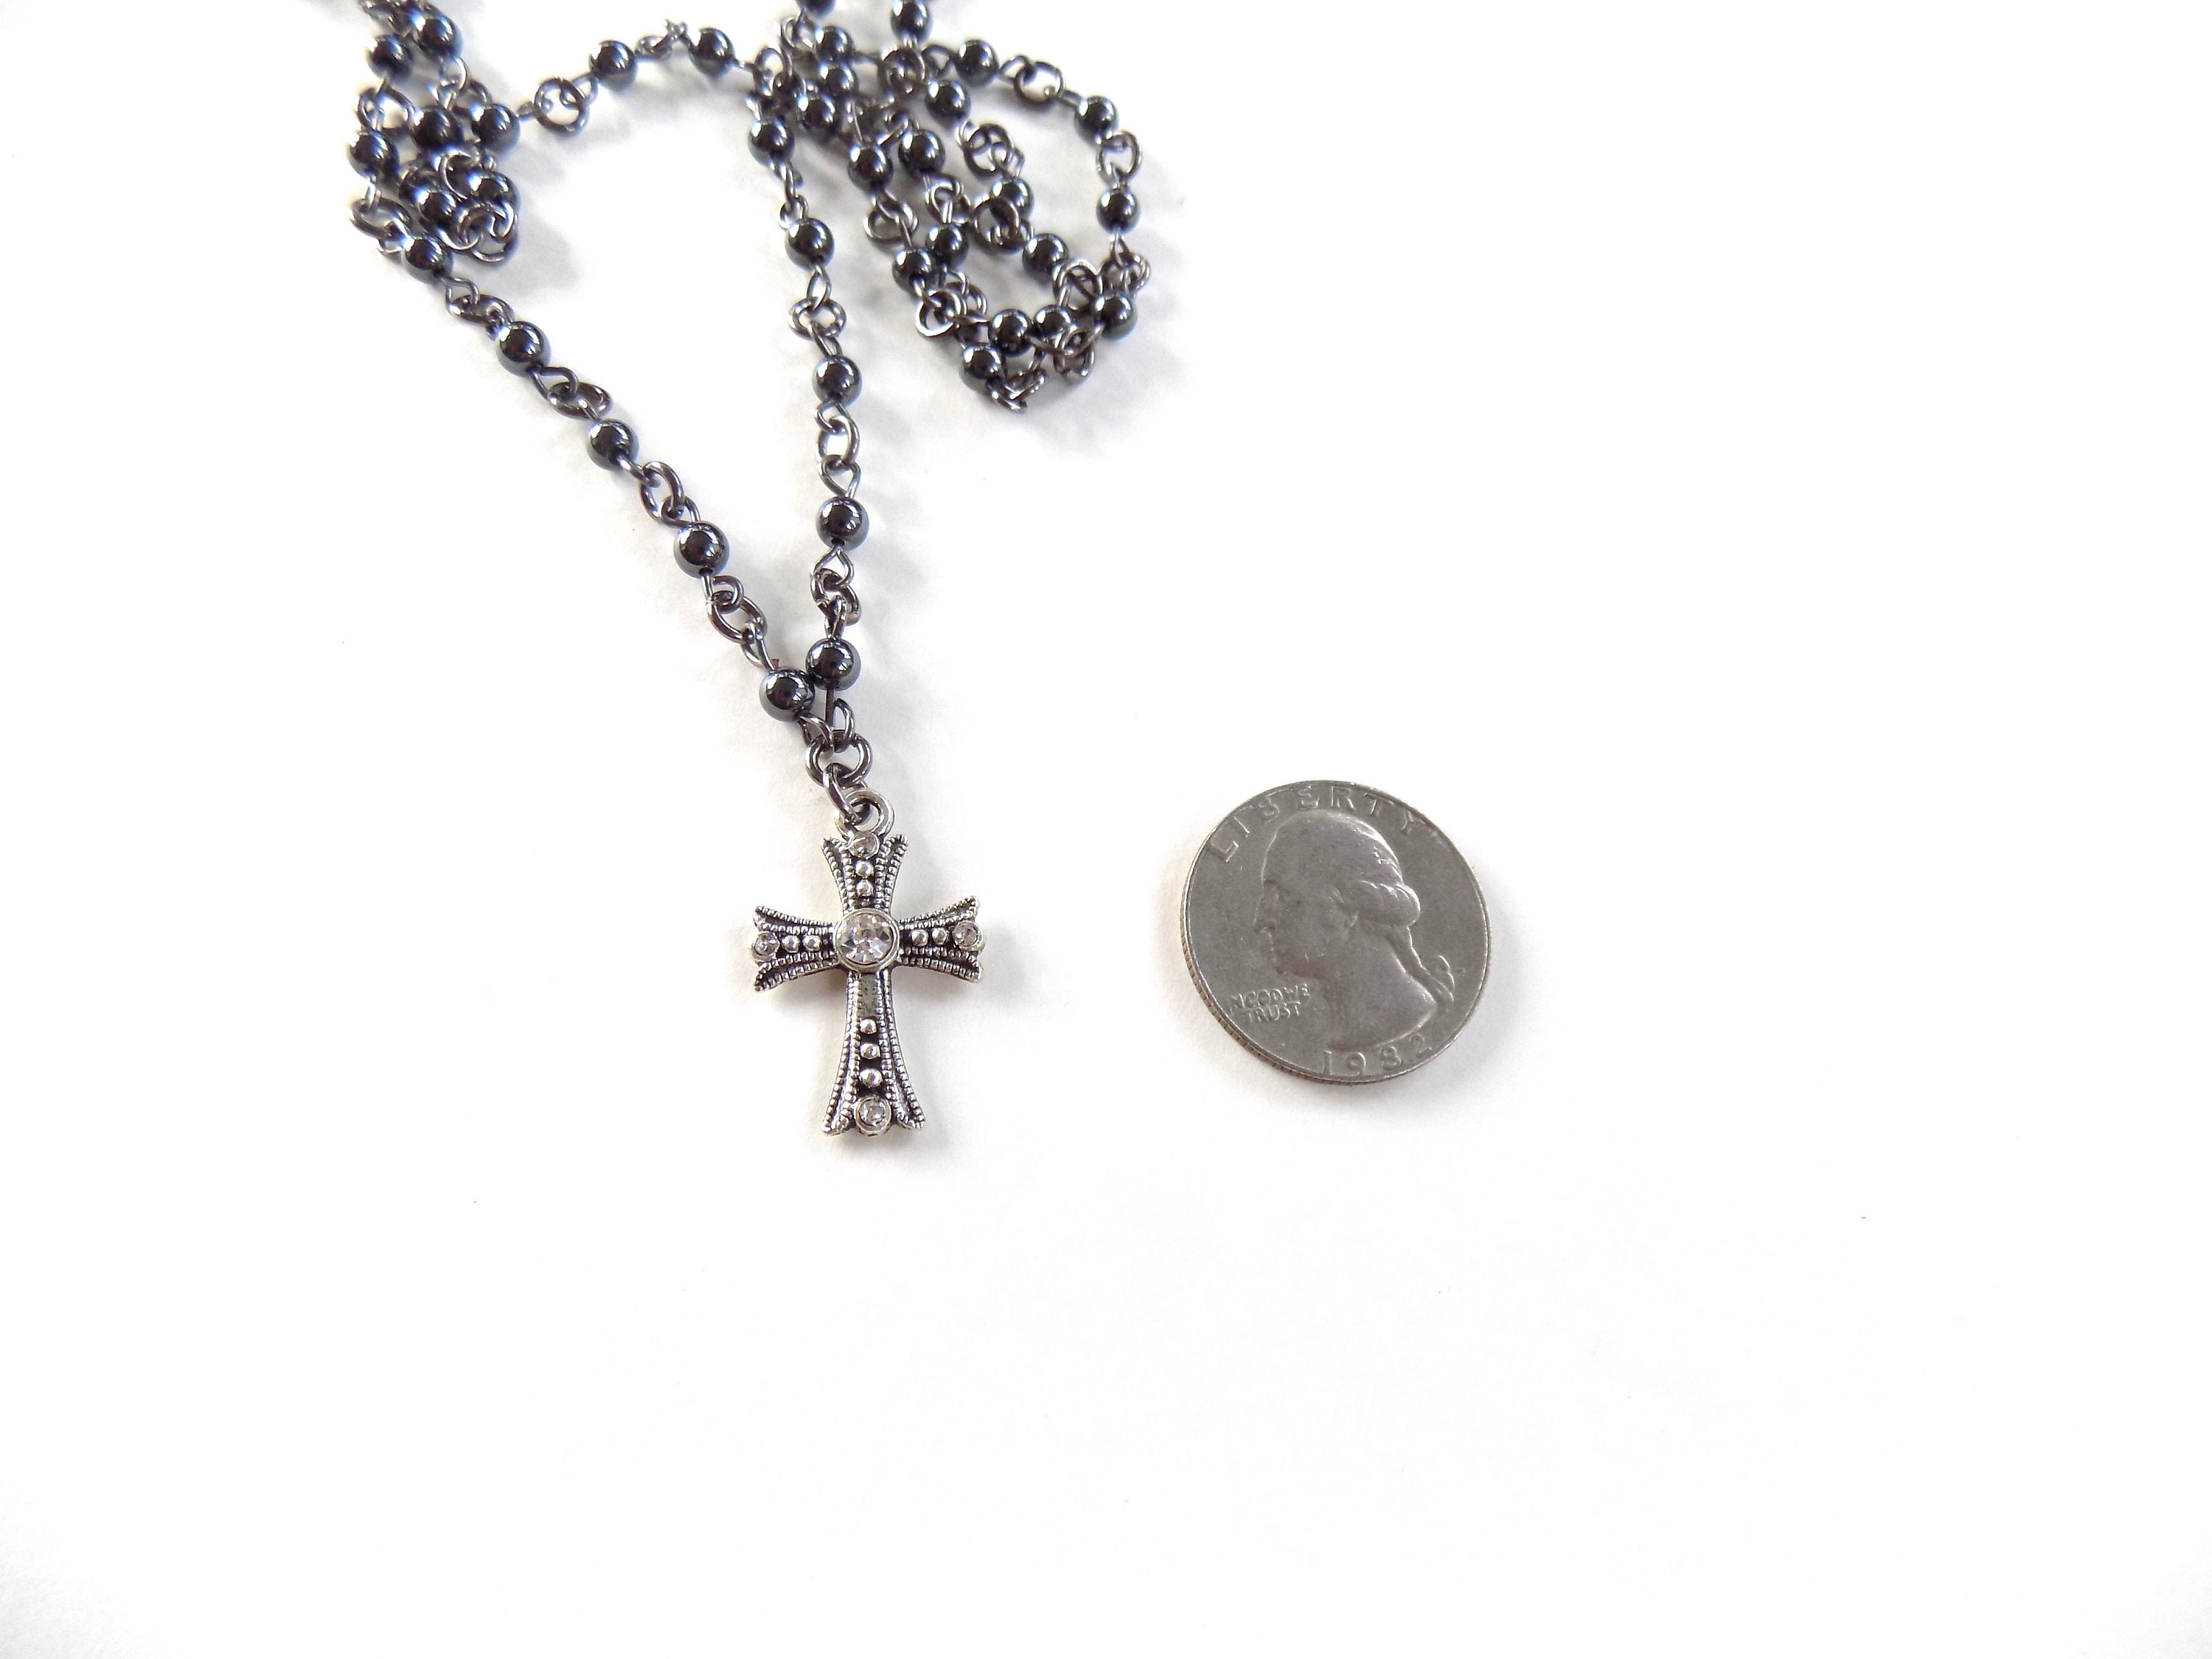 Gothic Jewelry Necklace | Gothic Rosary Necklaces | Gothic Cross Necklaces  - Necklace - Aliexpress